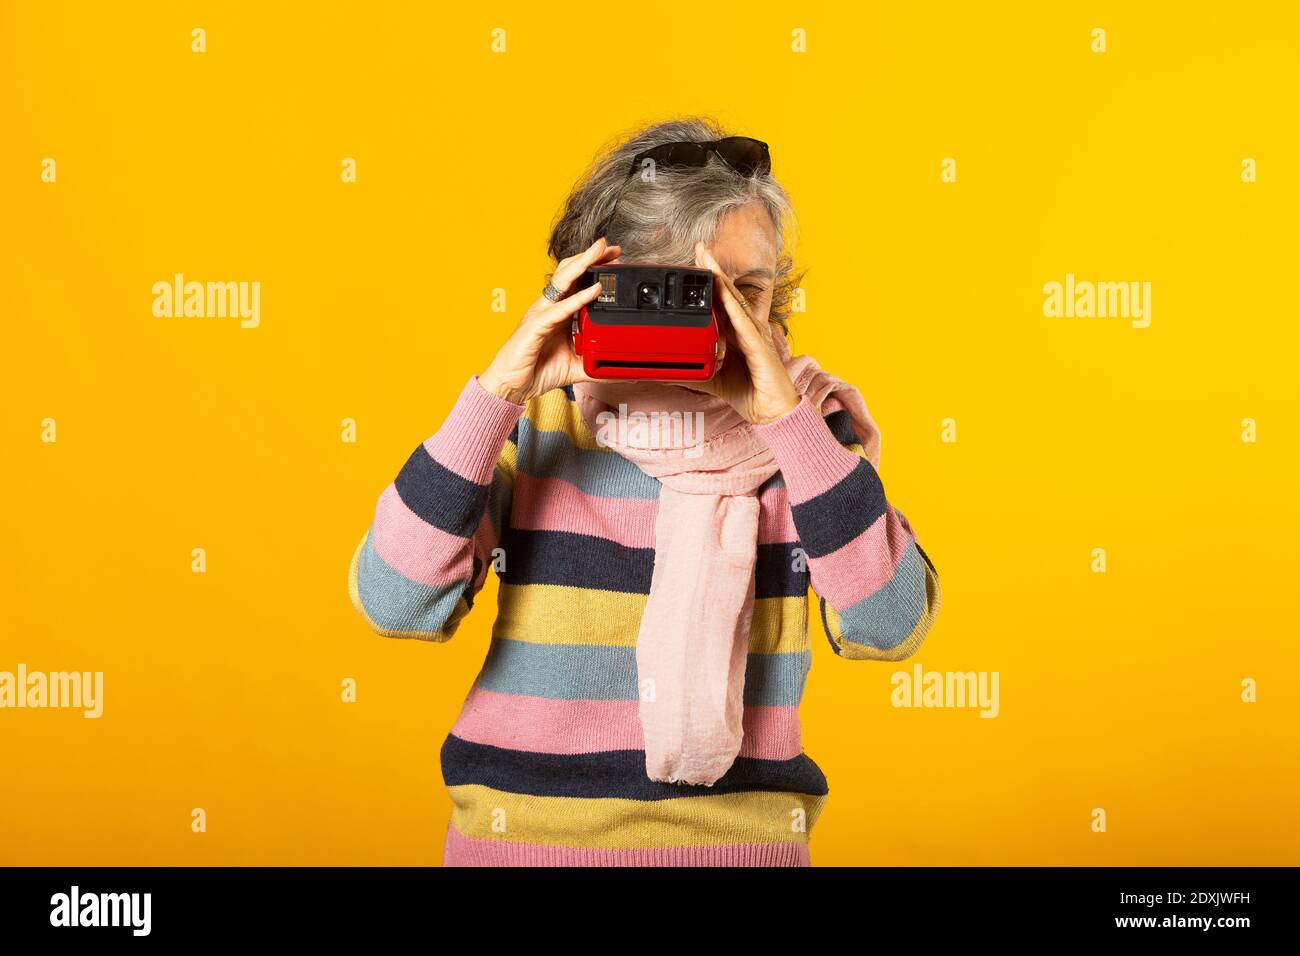 Senior woman in casual clothes taking a picture with an instant camera against a yellow background Stock Photo